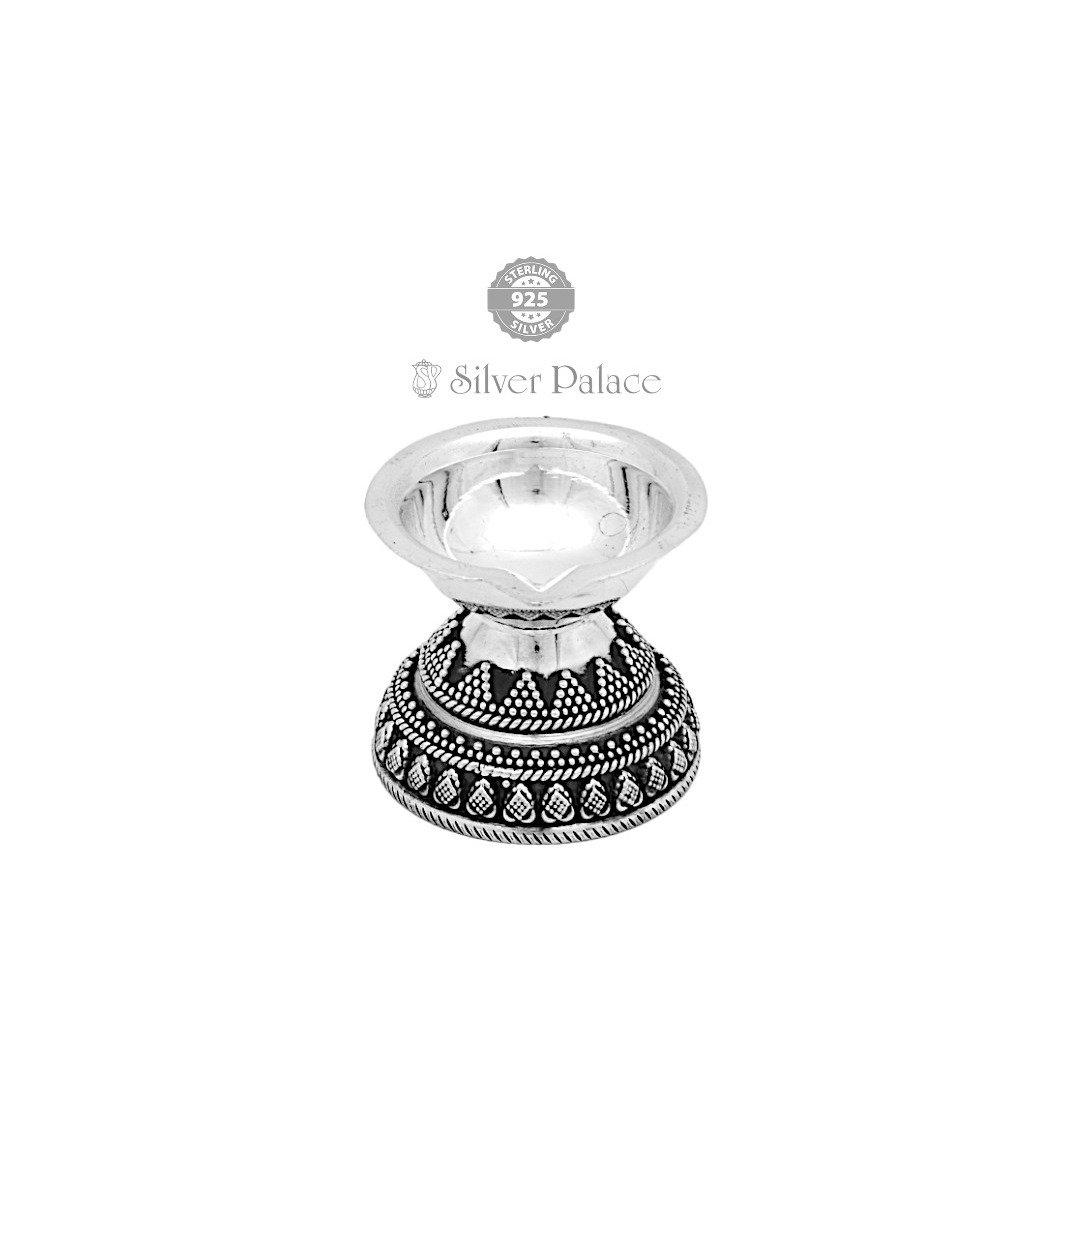 92.5 PURE SILVER  LAMP FOR POOJA